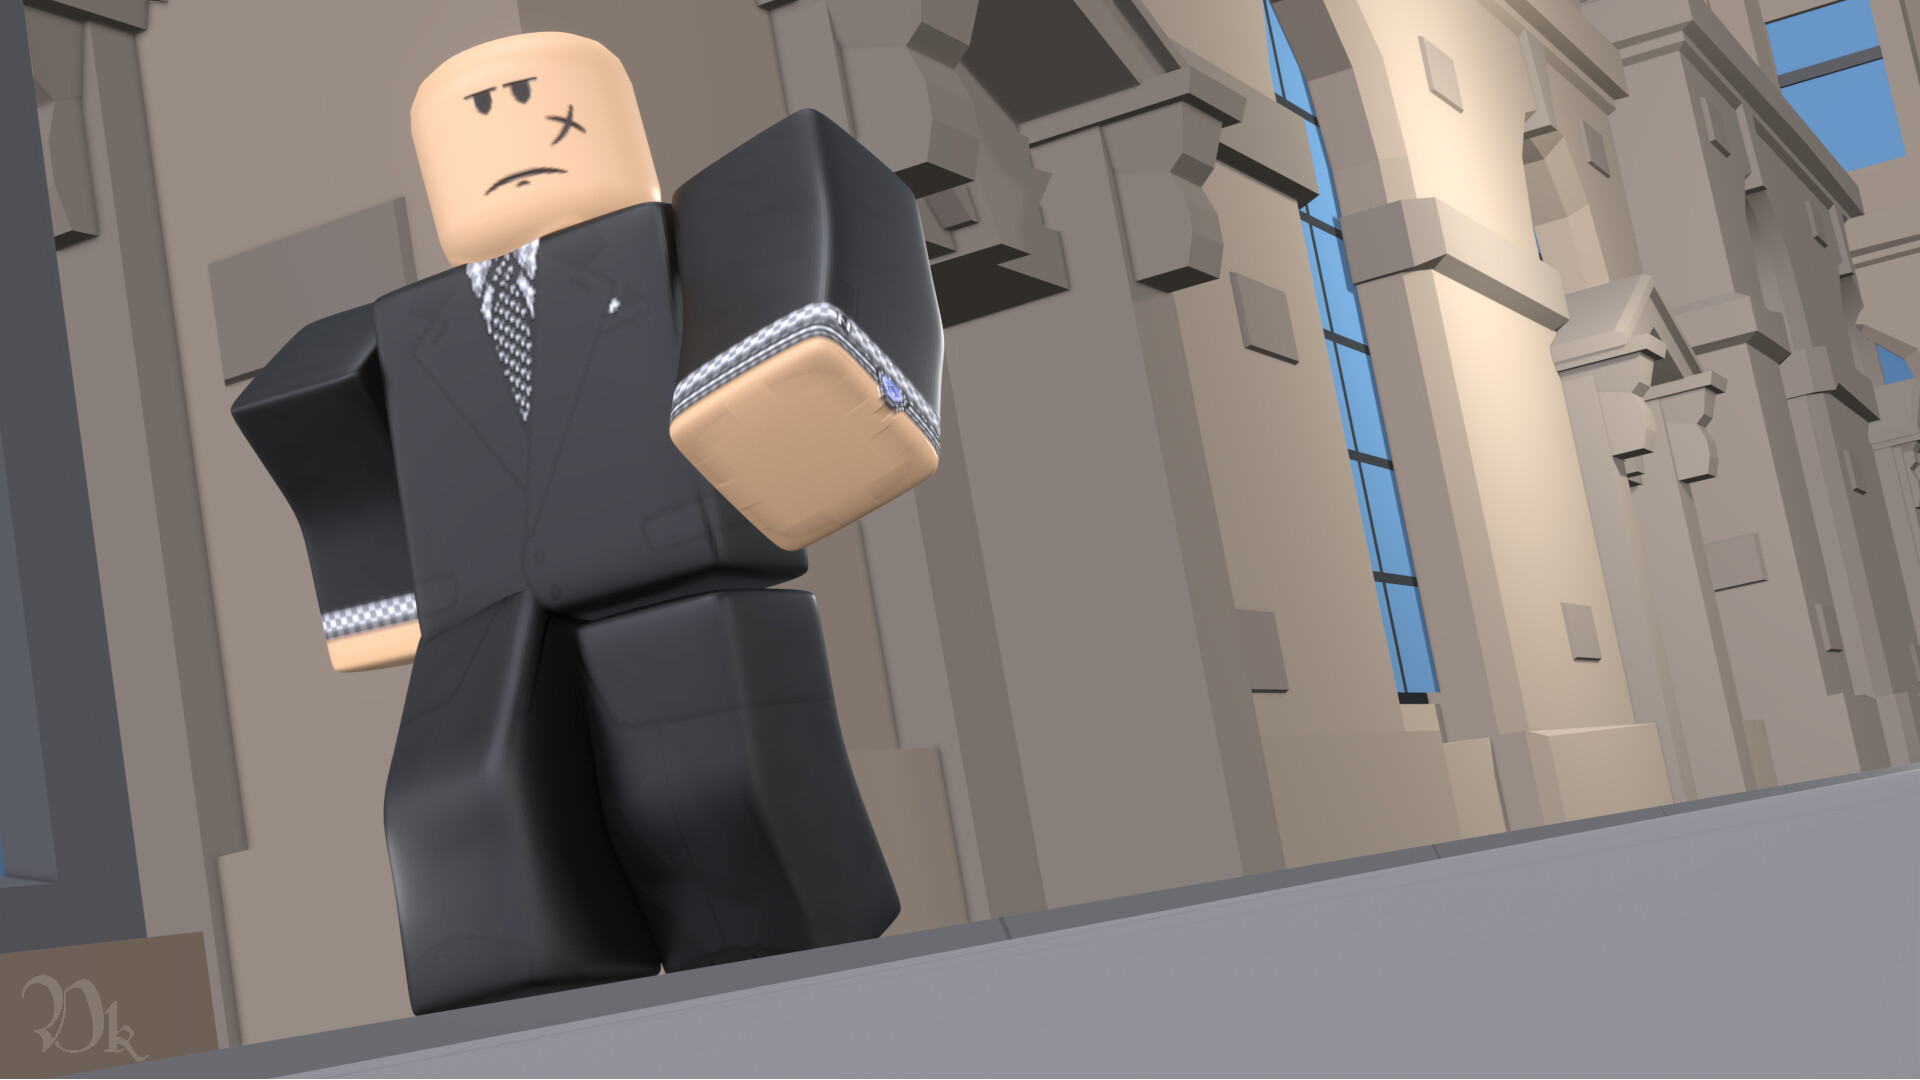 Make you a roblox 3d hd gfx out of your roblox avatar by